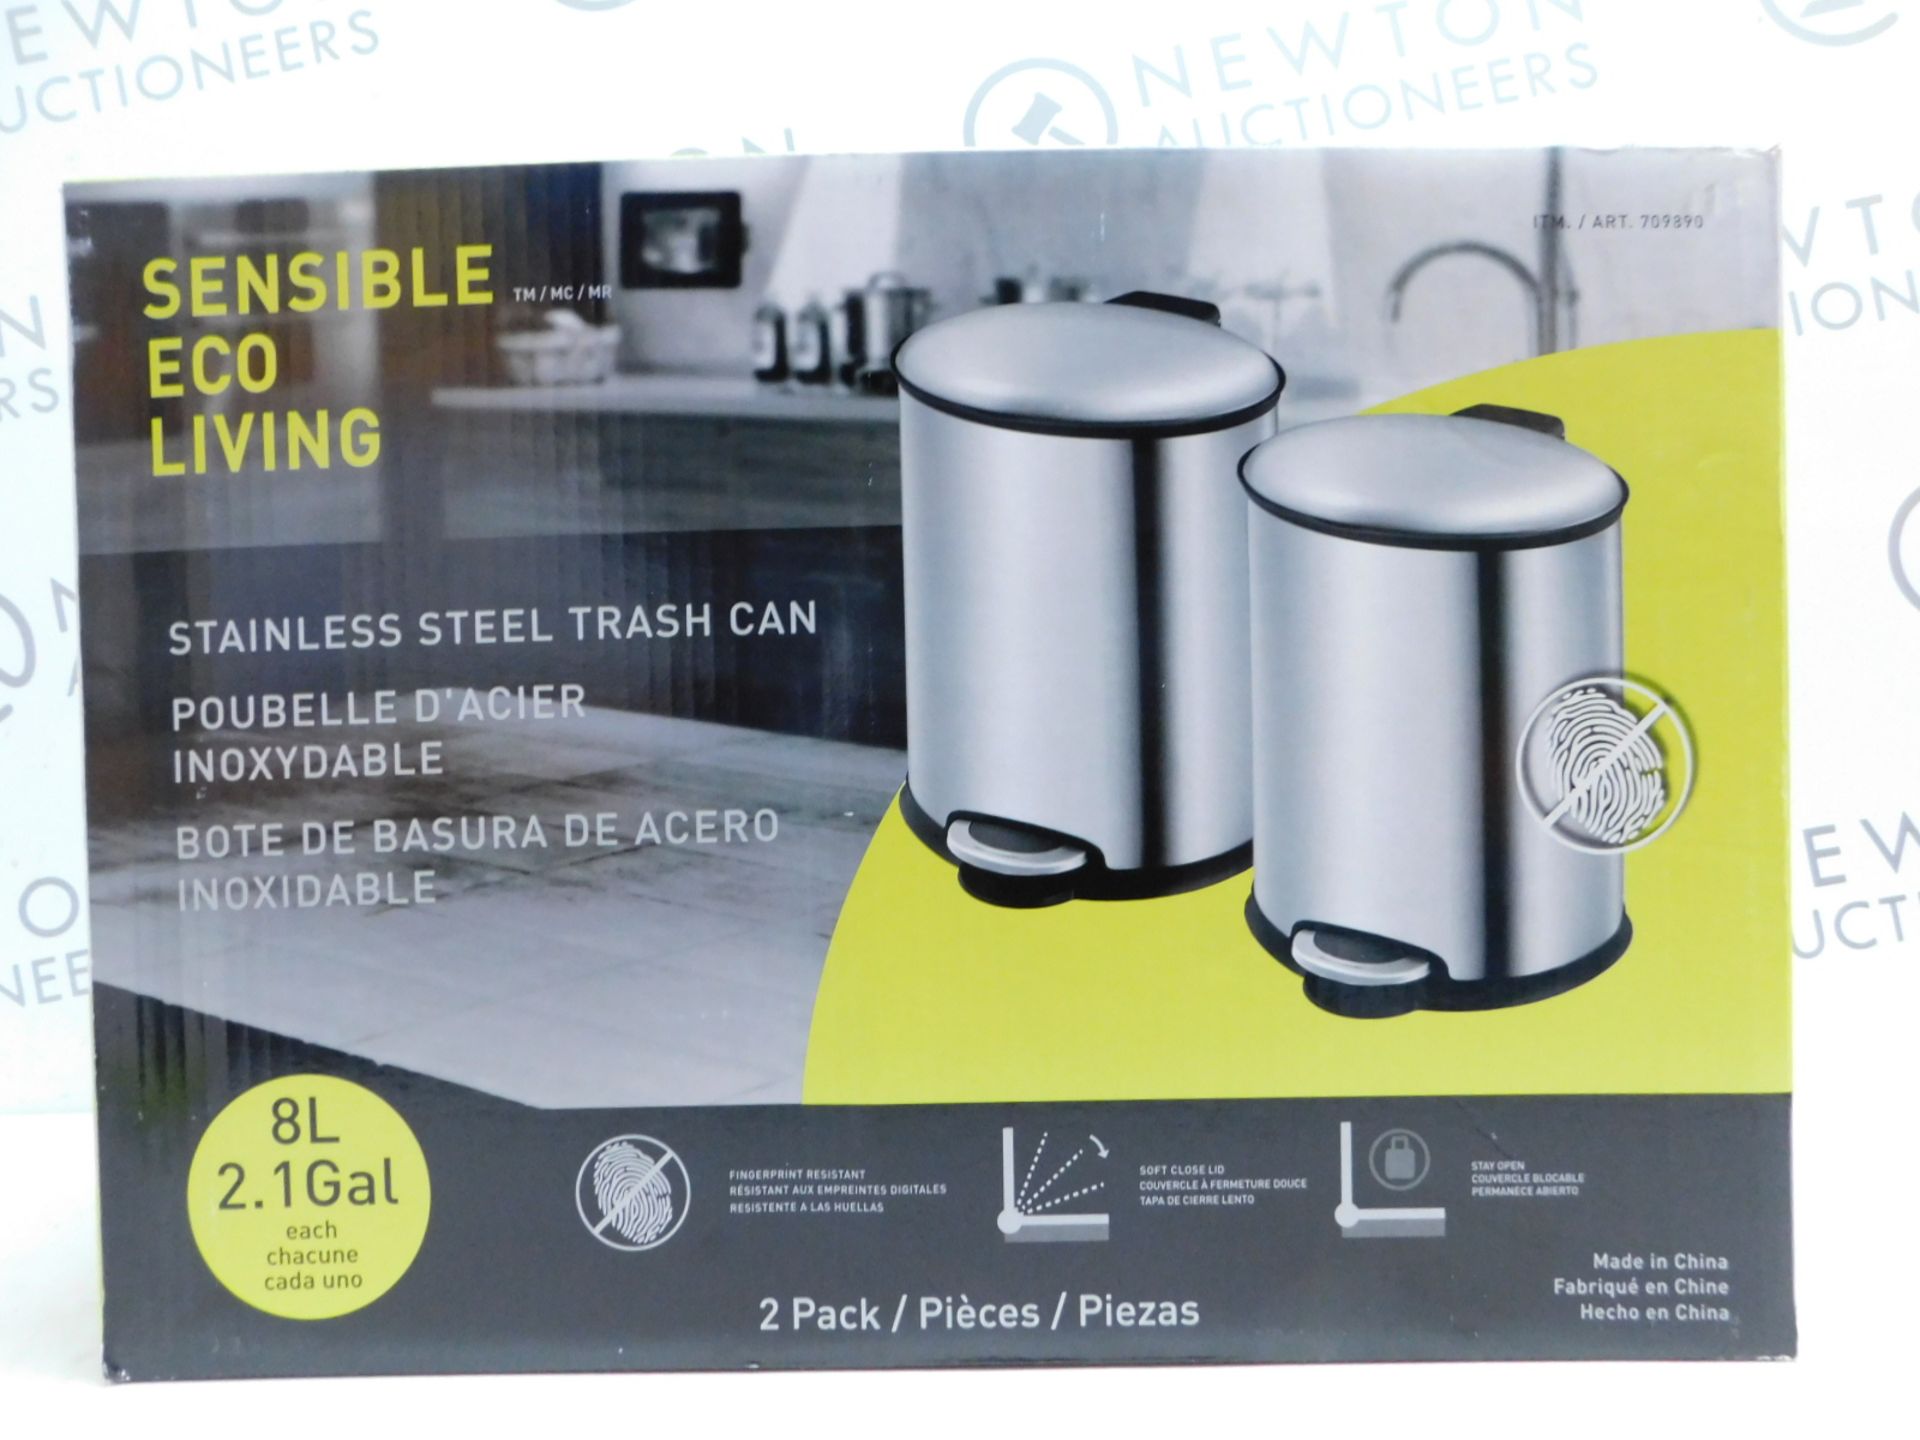 1 BOXED SET OF 2 SENSIBLE ECO LIVING STAINLESS STEEL PEDAL BINS RRP Â£39.99